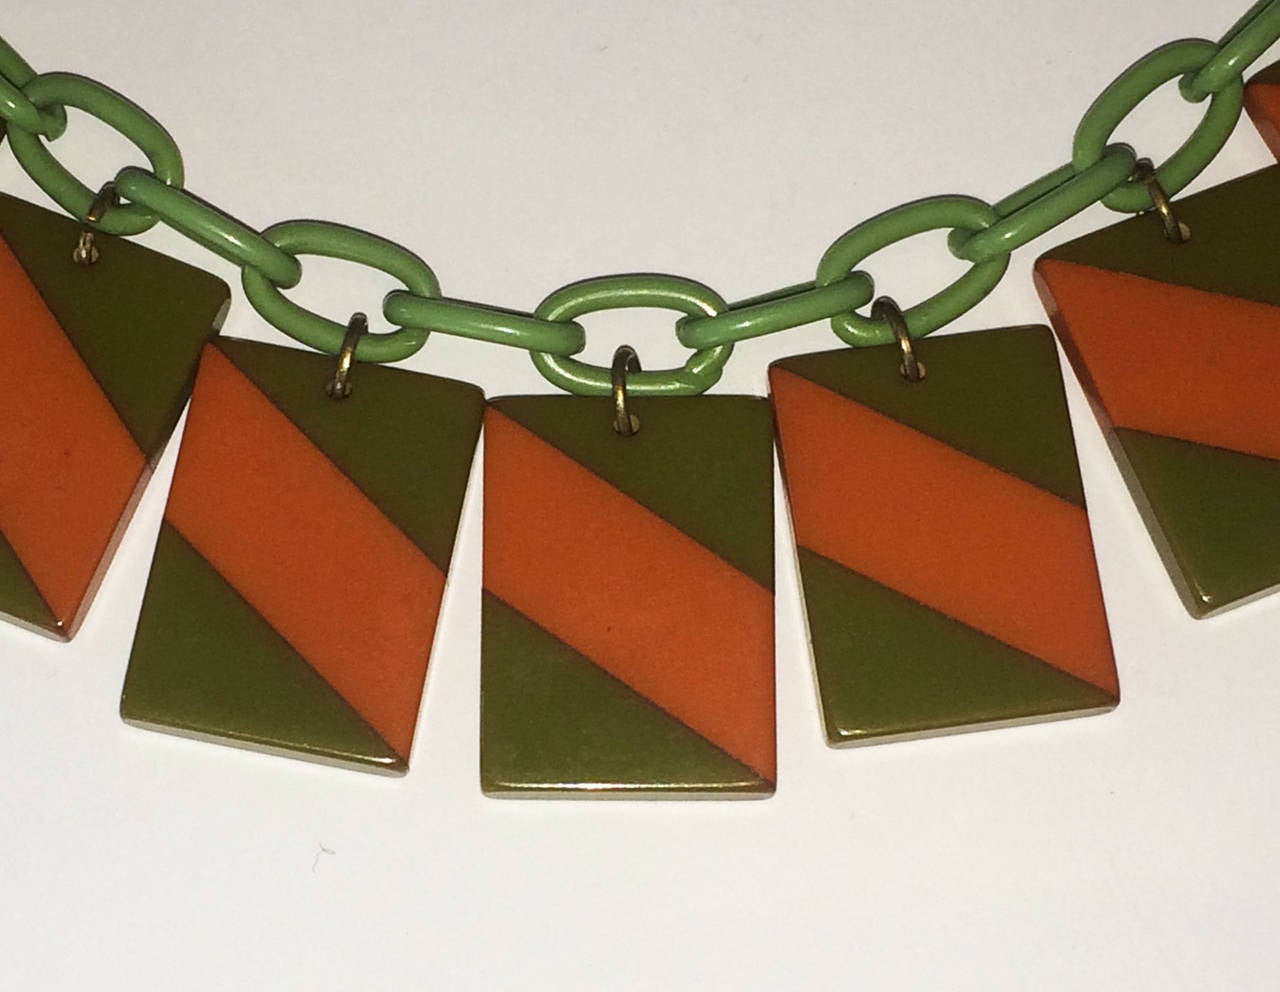 Art Deco Necklace Very rare Laminated, Geometrical Orange and Green Bakelite Rectangles on Celluloid links. Rare, fused two colour Bakelite, on continuous, interlocking celluloid chain links, all in excellent condition, including the metal clasp to